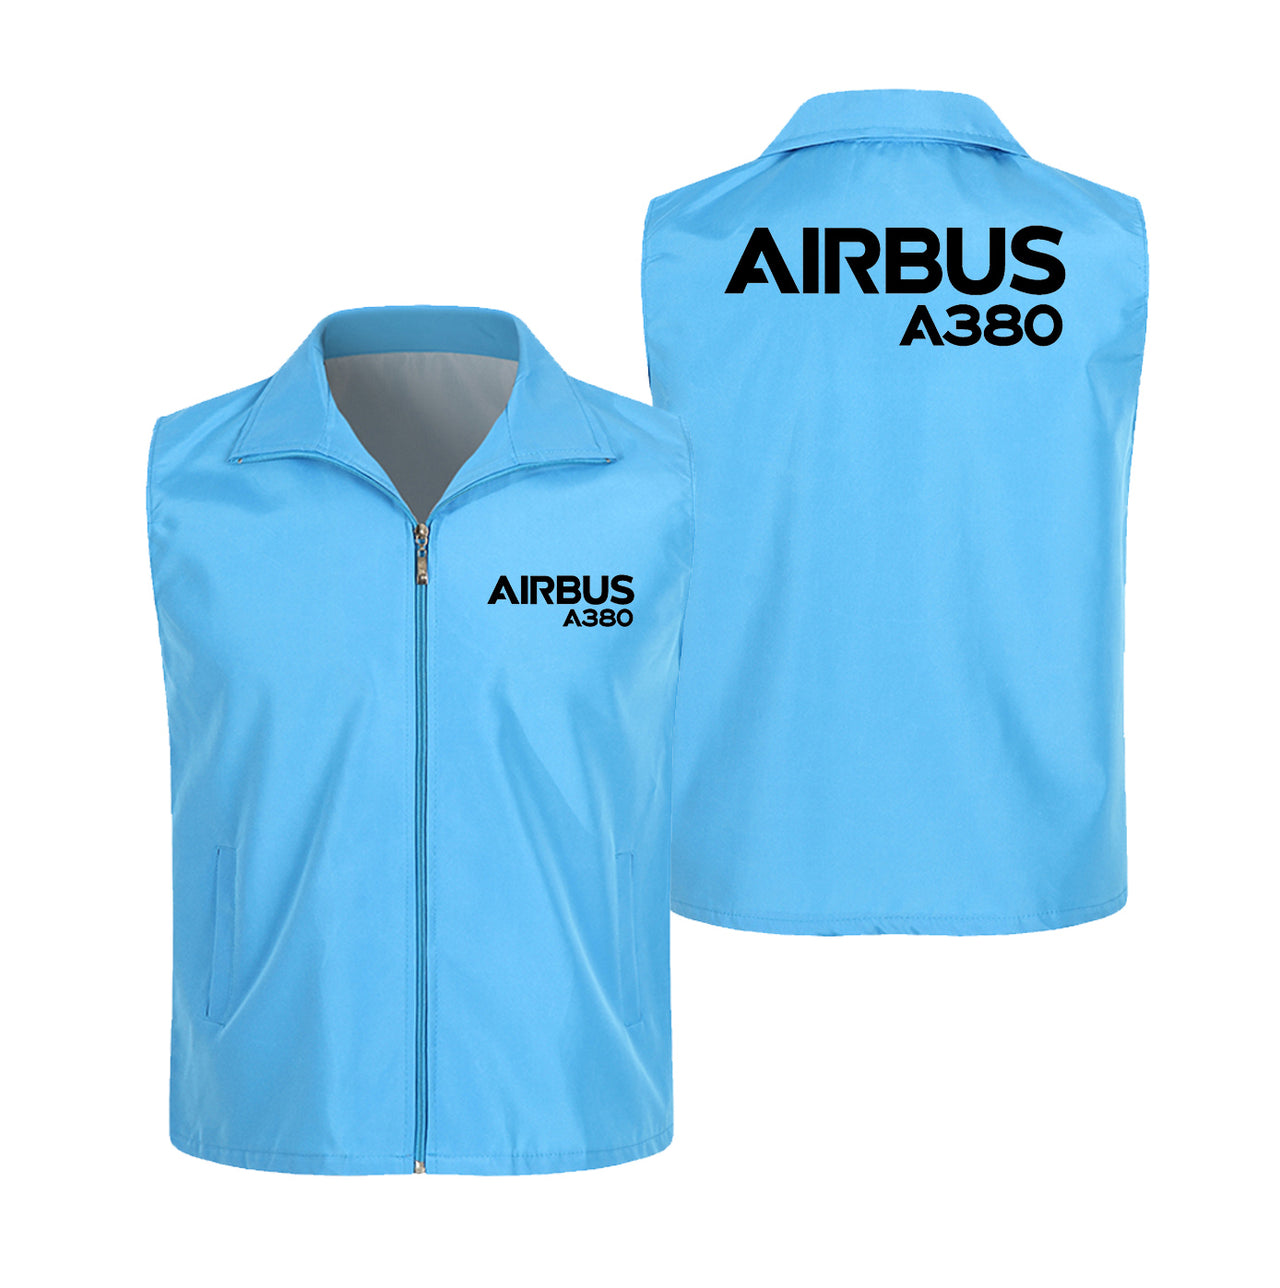 Airbus A380 & Text Designed Thin Style Vests